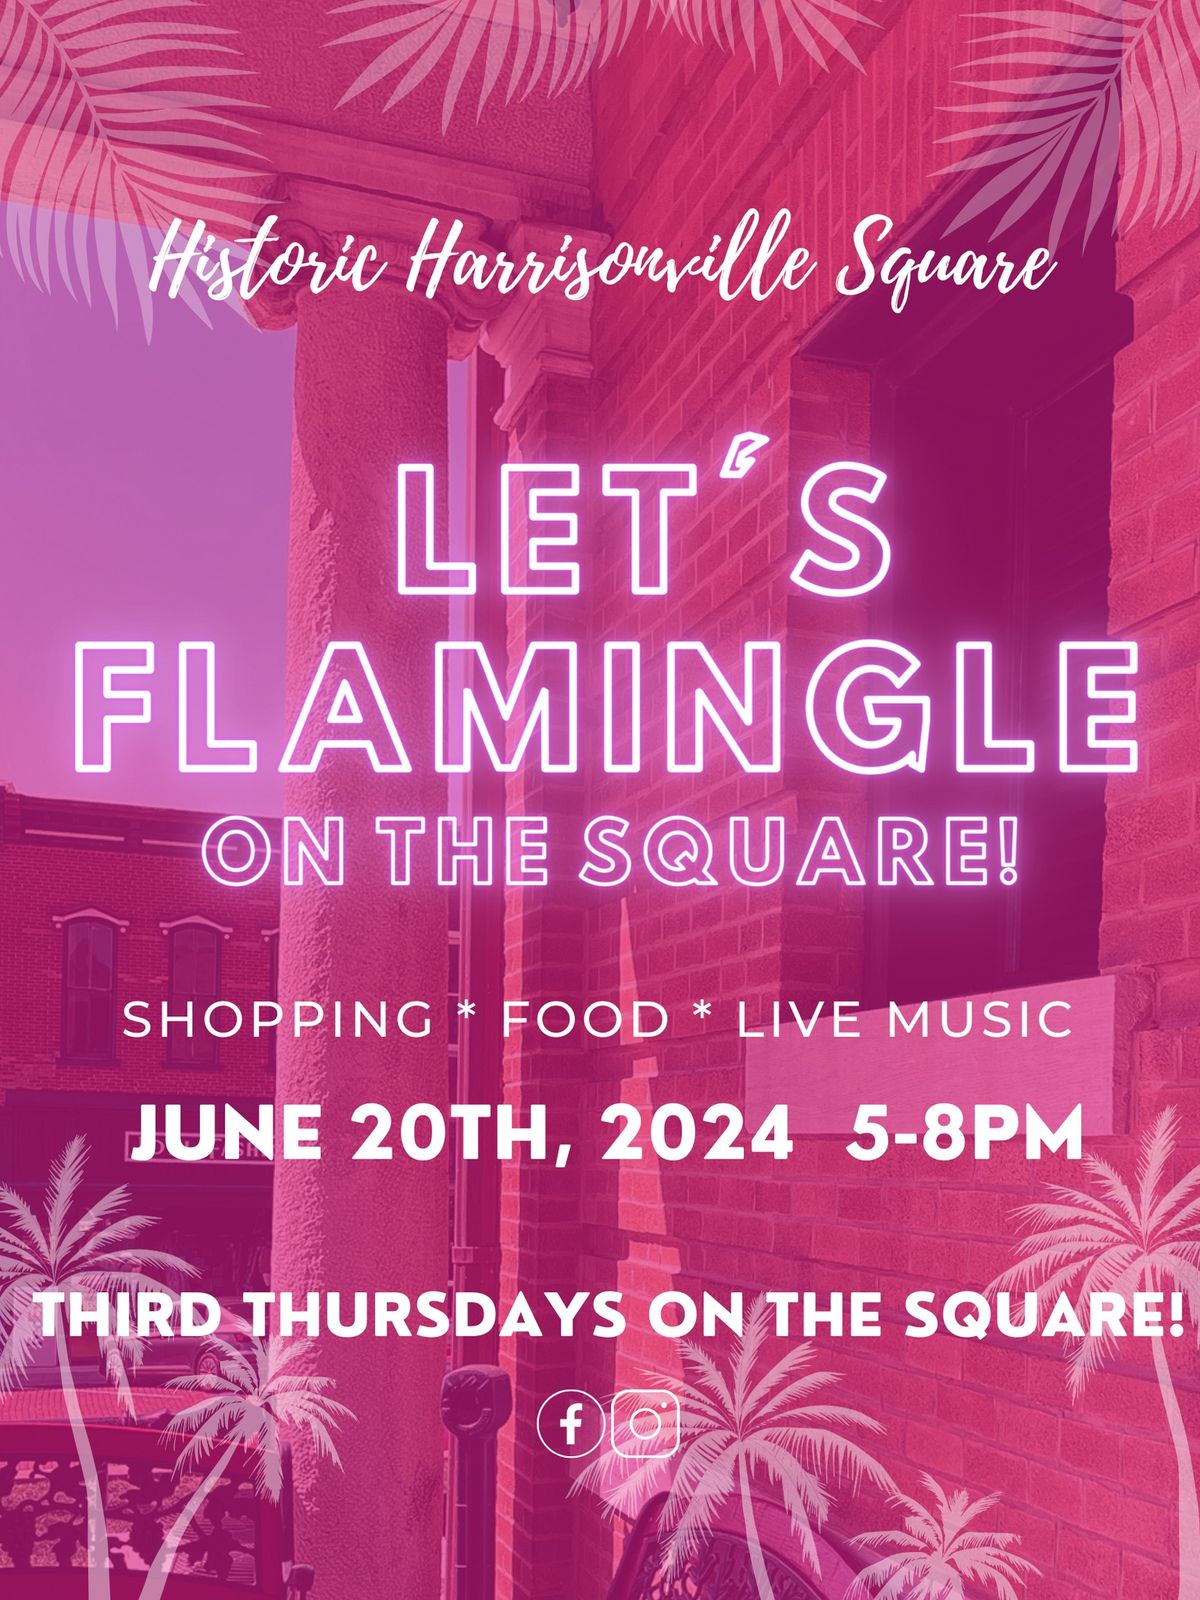 Let's FLAMINGLE!  JUNE "Third Thursday" on the square!